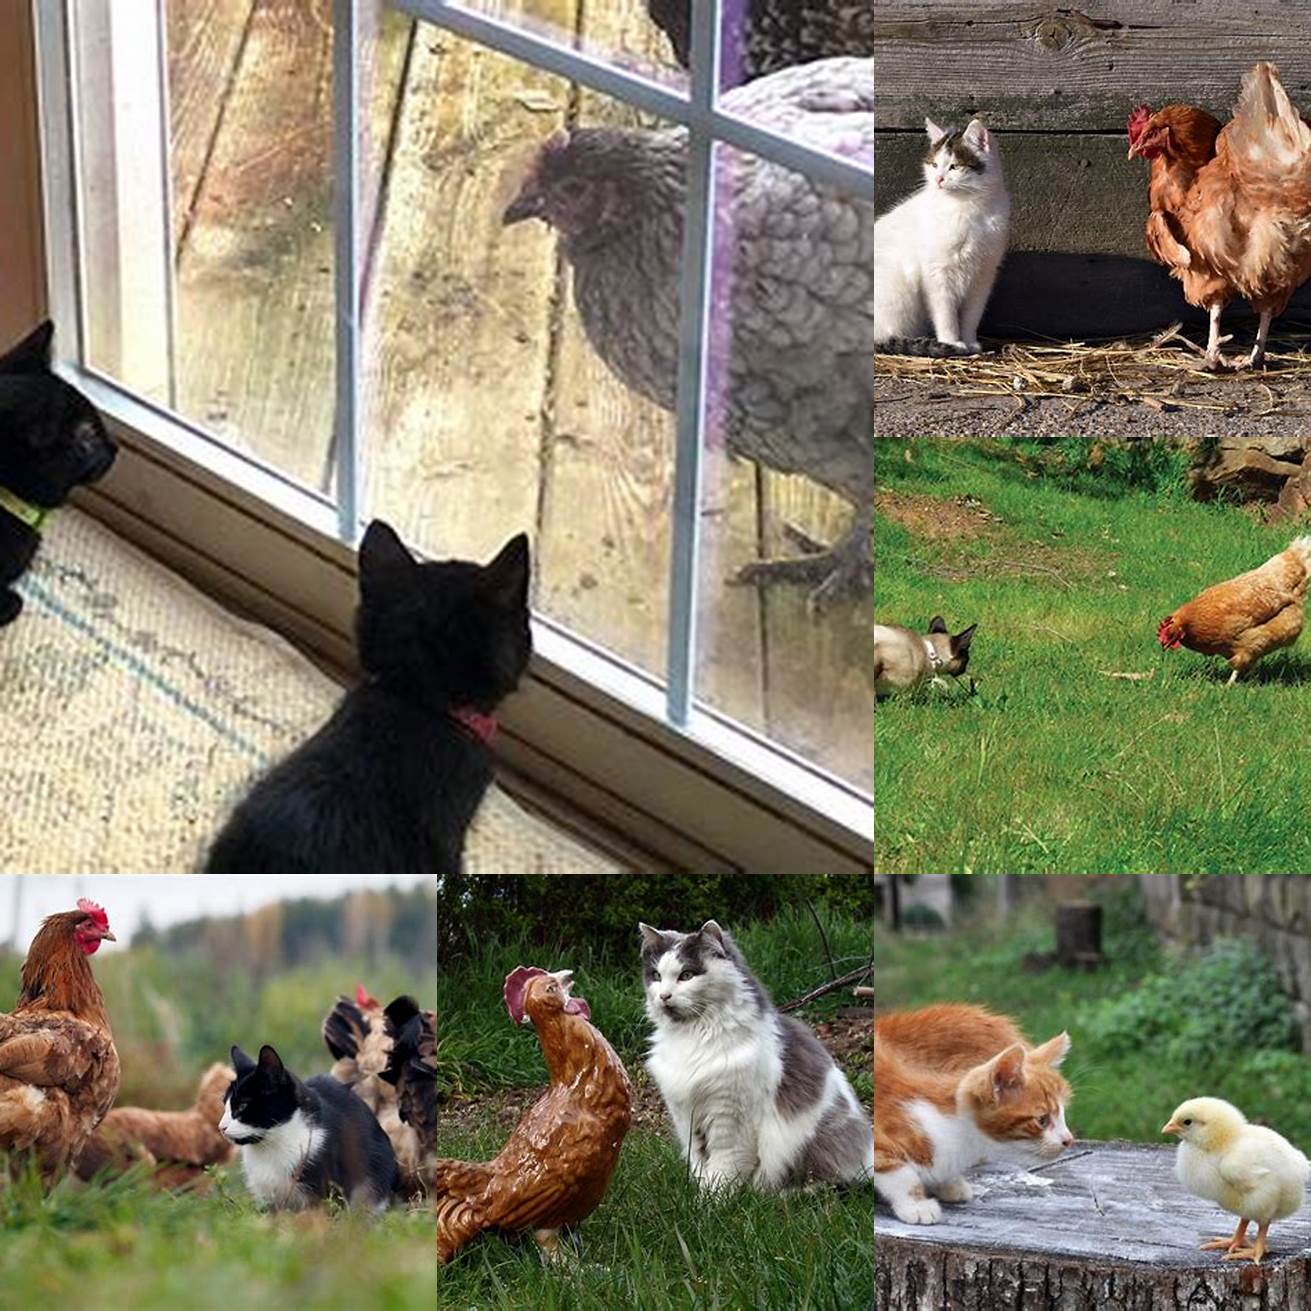 Keep your cat and chickens separated when necessary